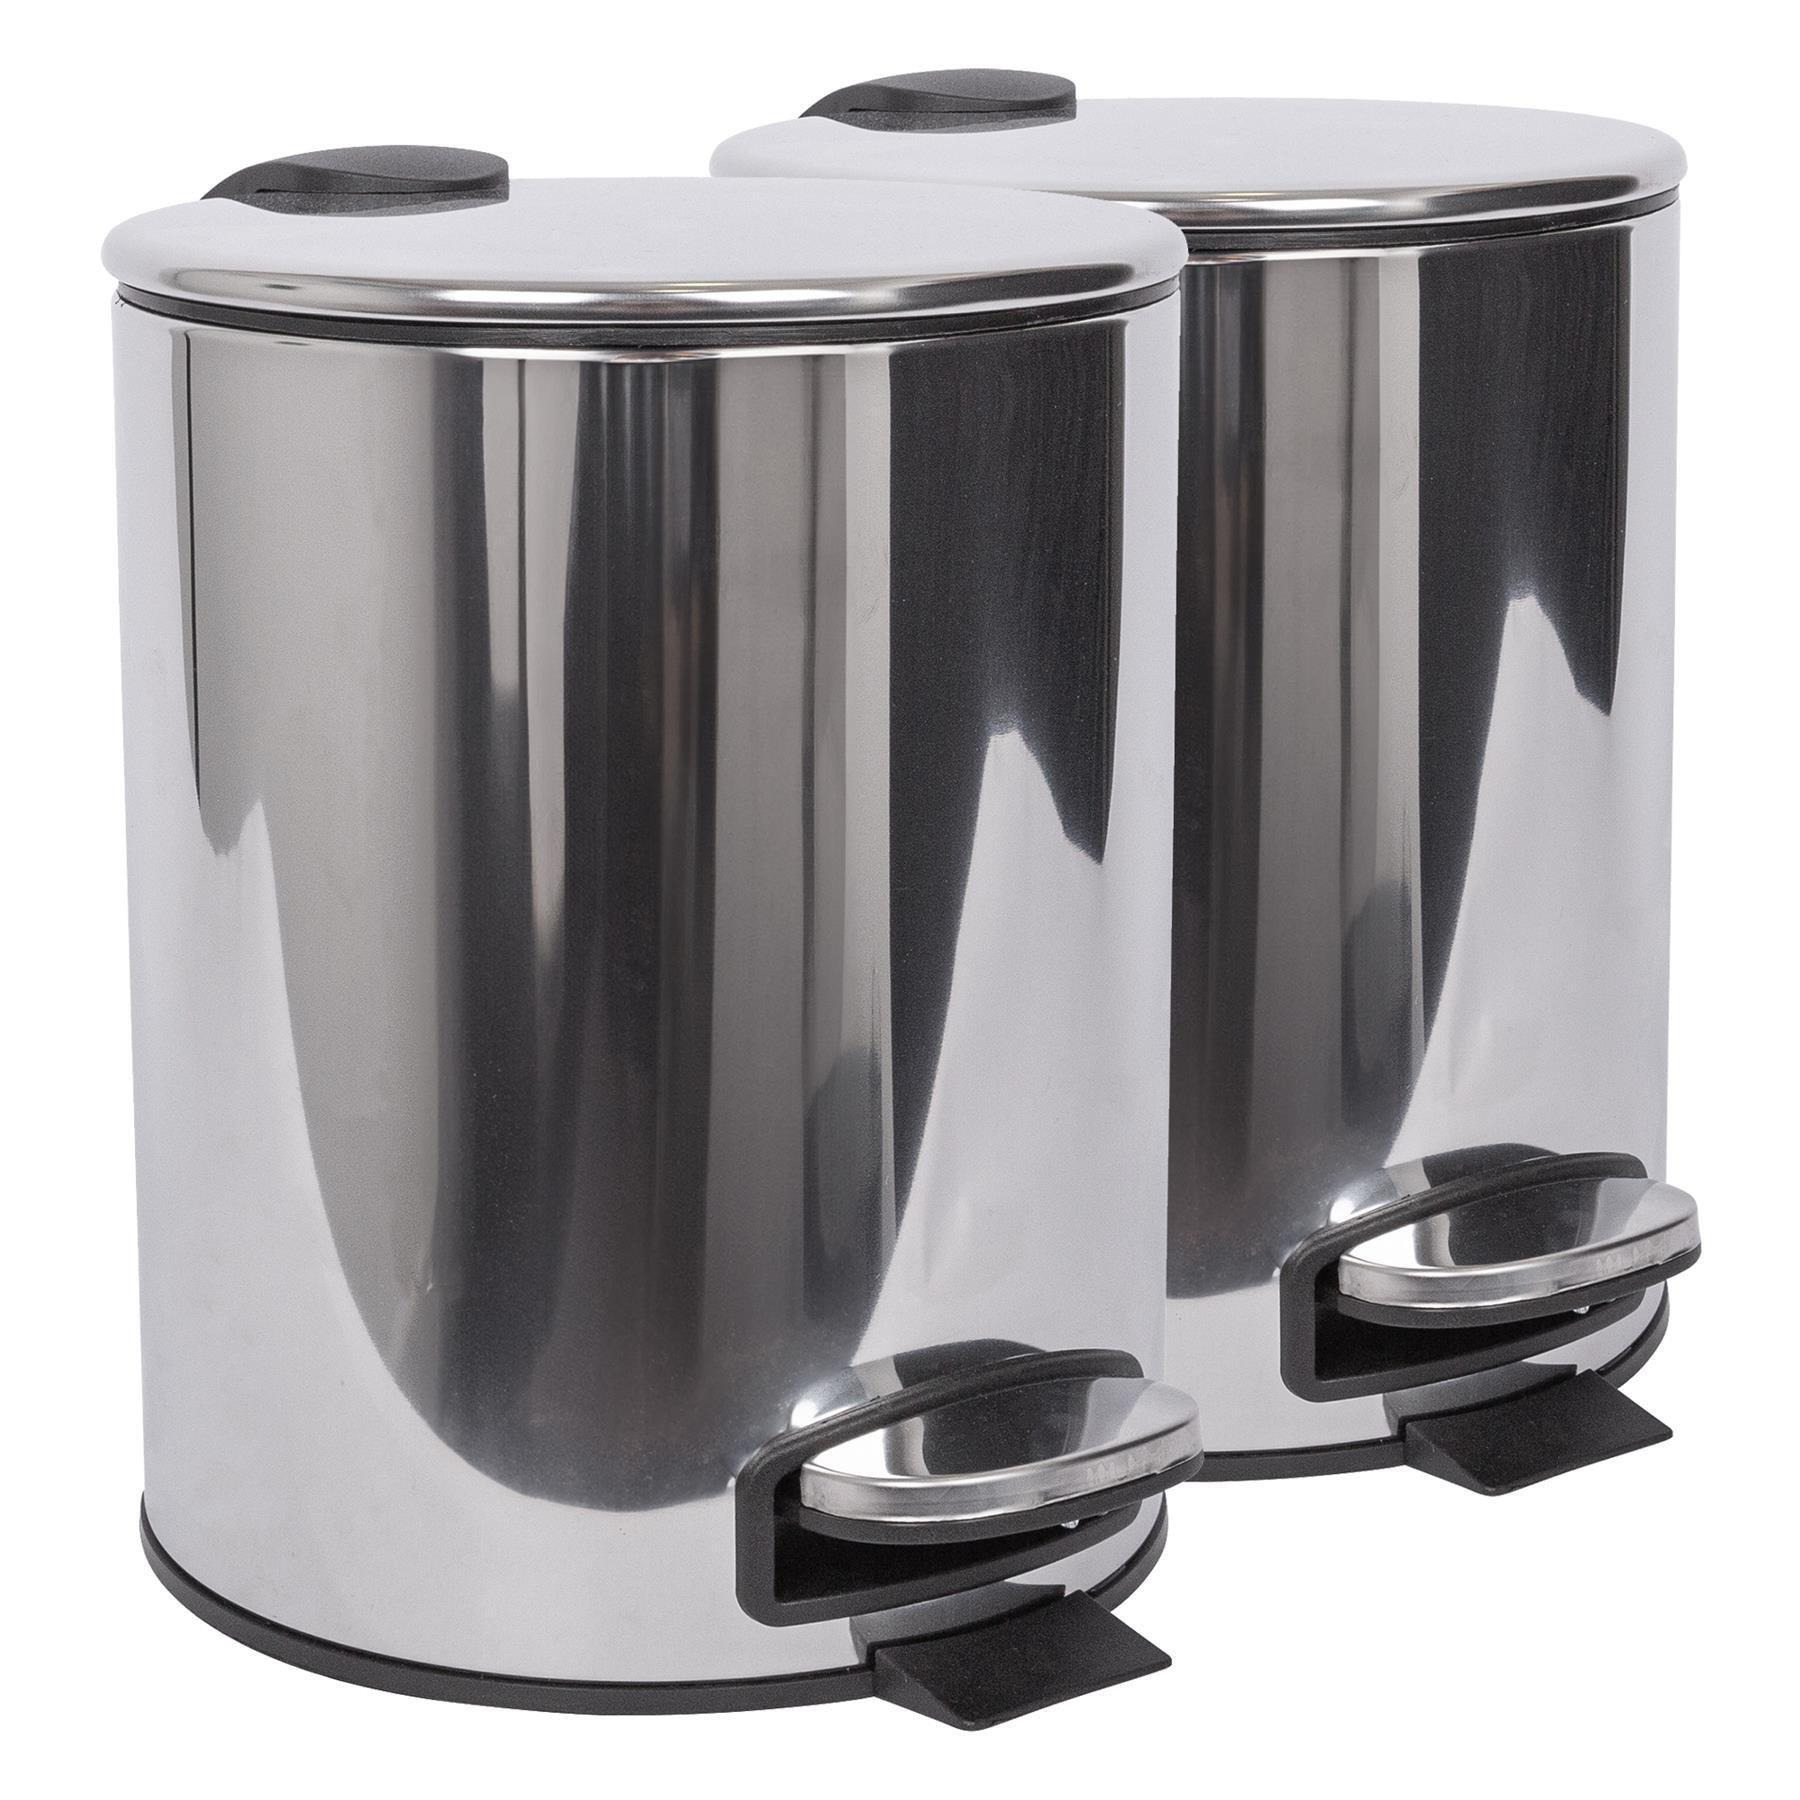 Round Stainless Steel Pedal Bins - 5L - Chrome - Pack of 2 - image 1